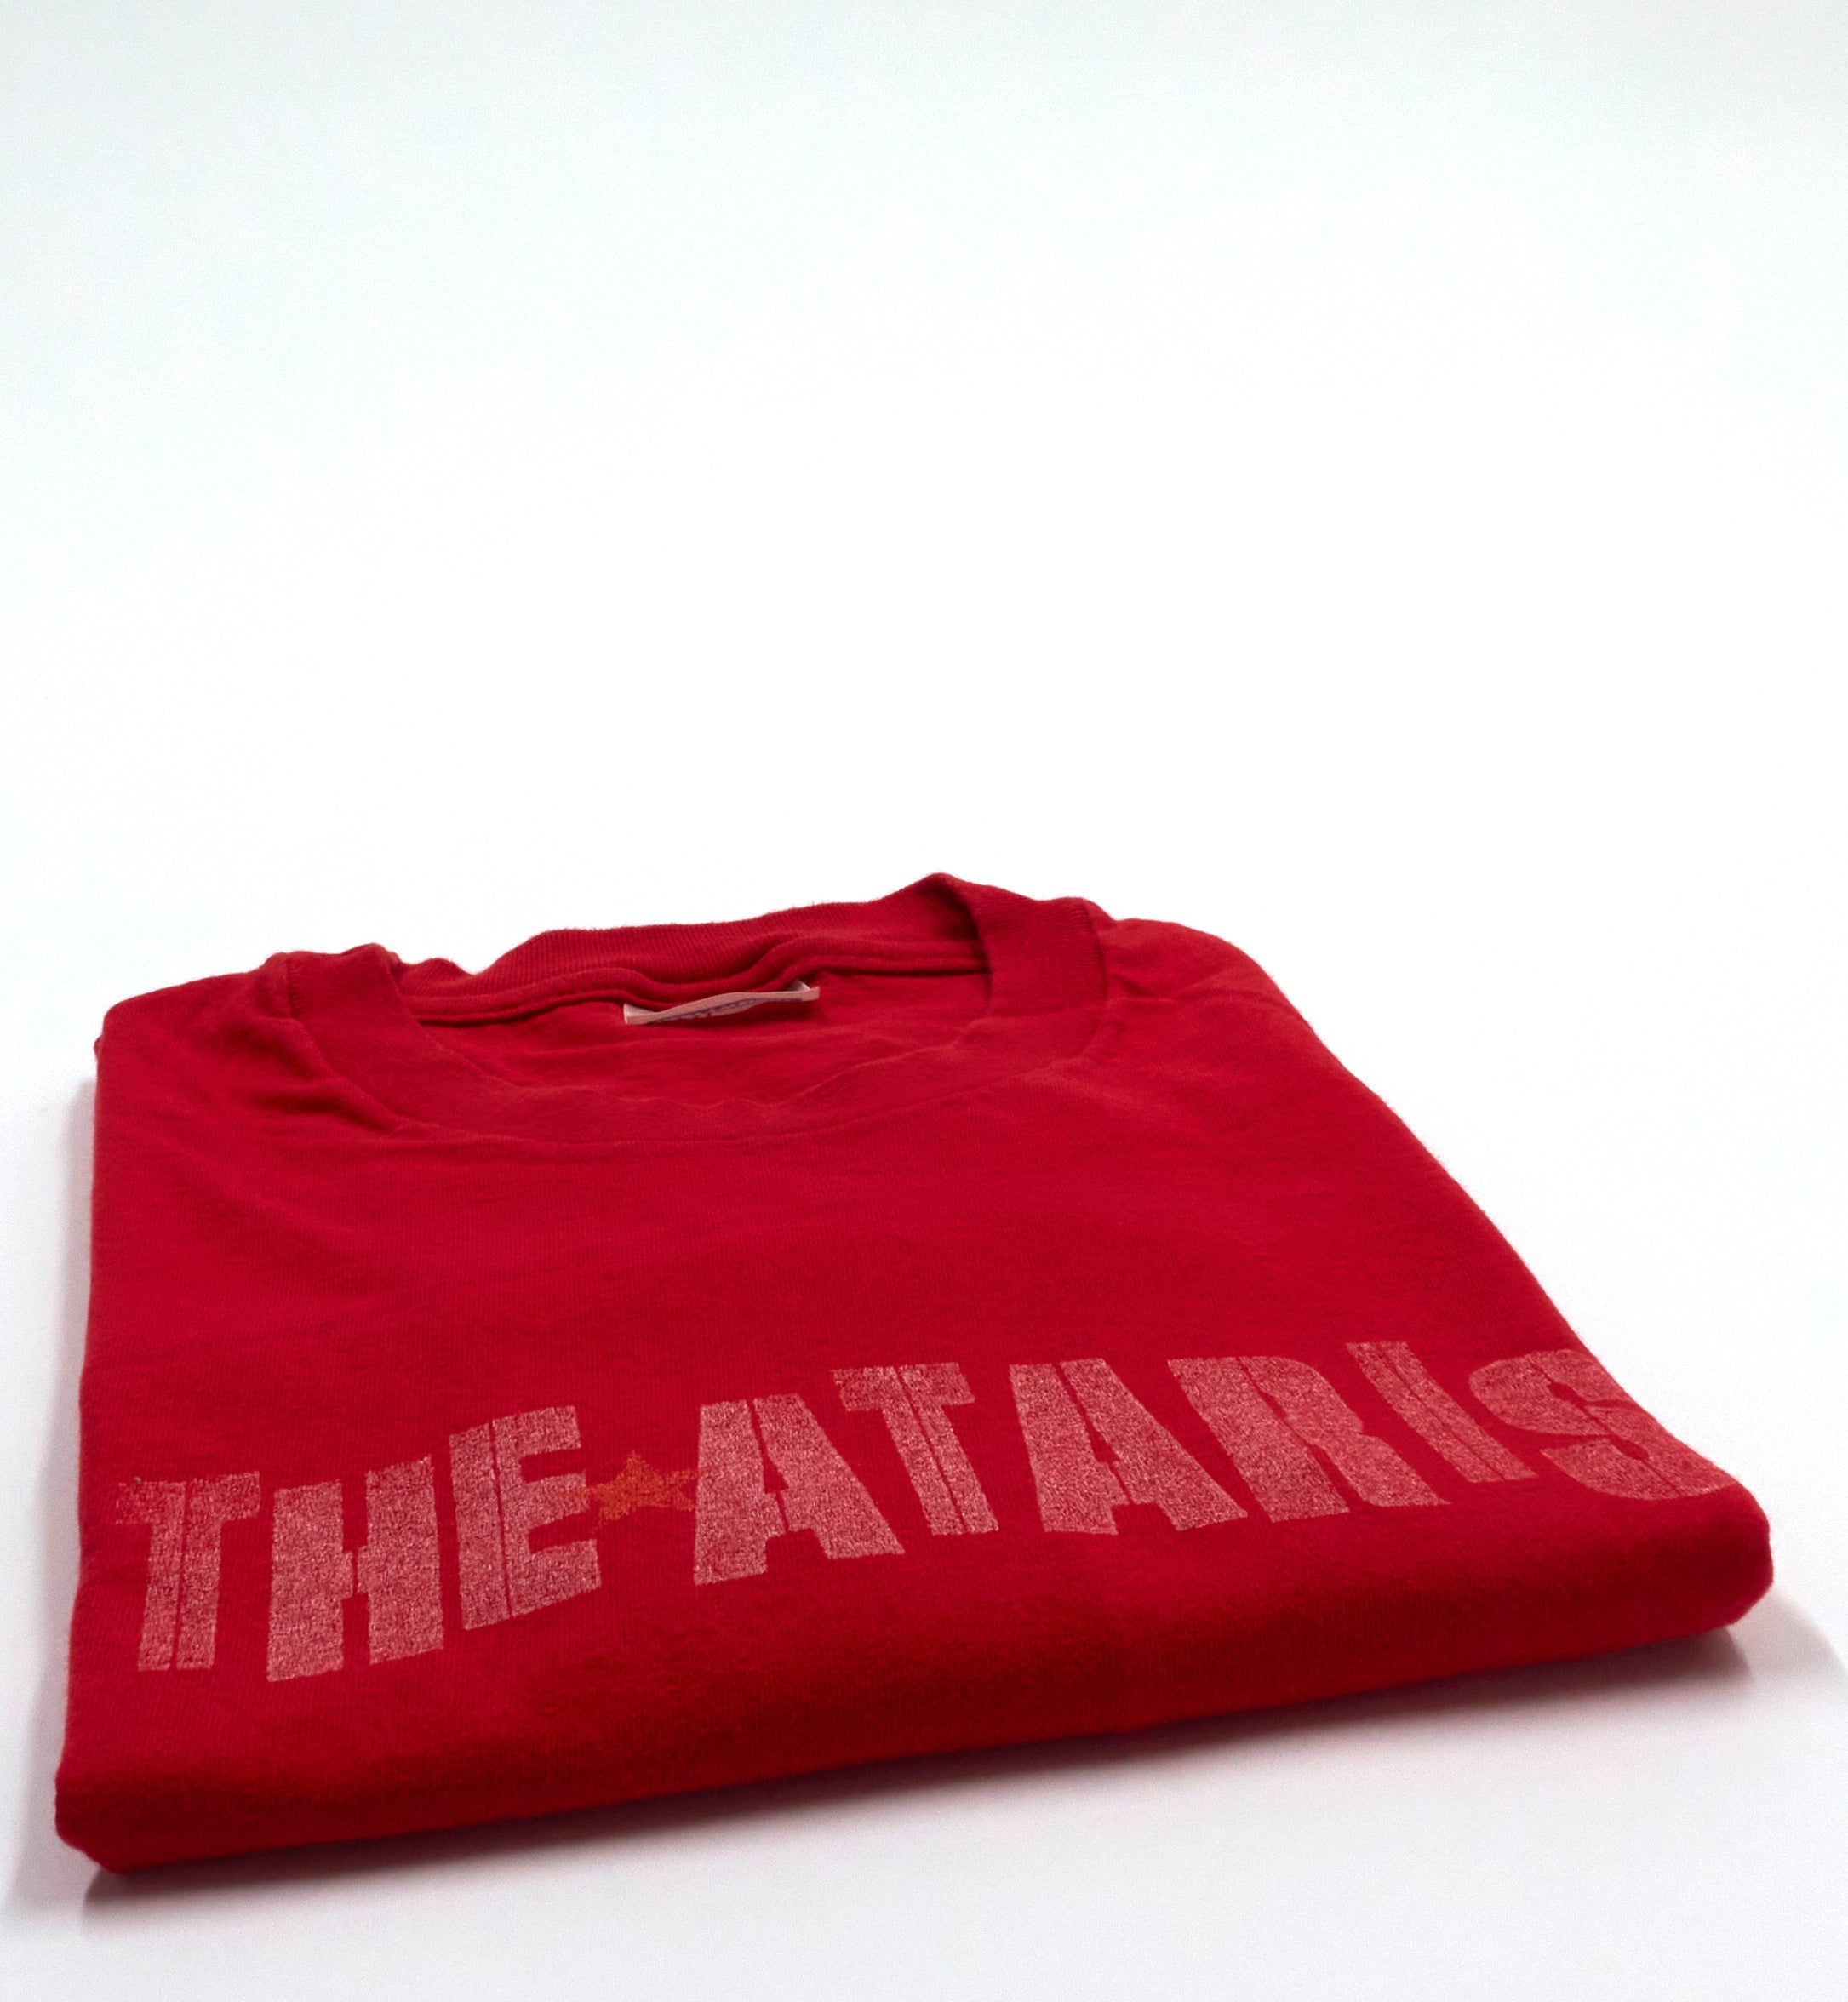 the Ataris - You're Better Off Without Me Tour Shirt Red Size XL